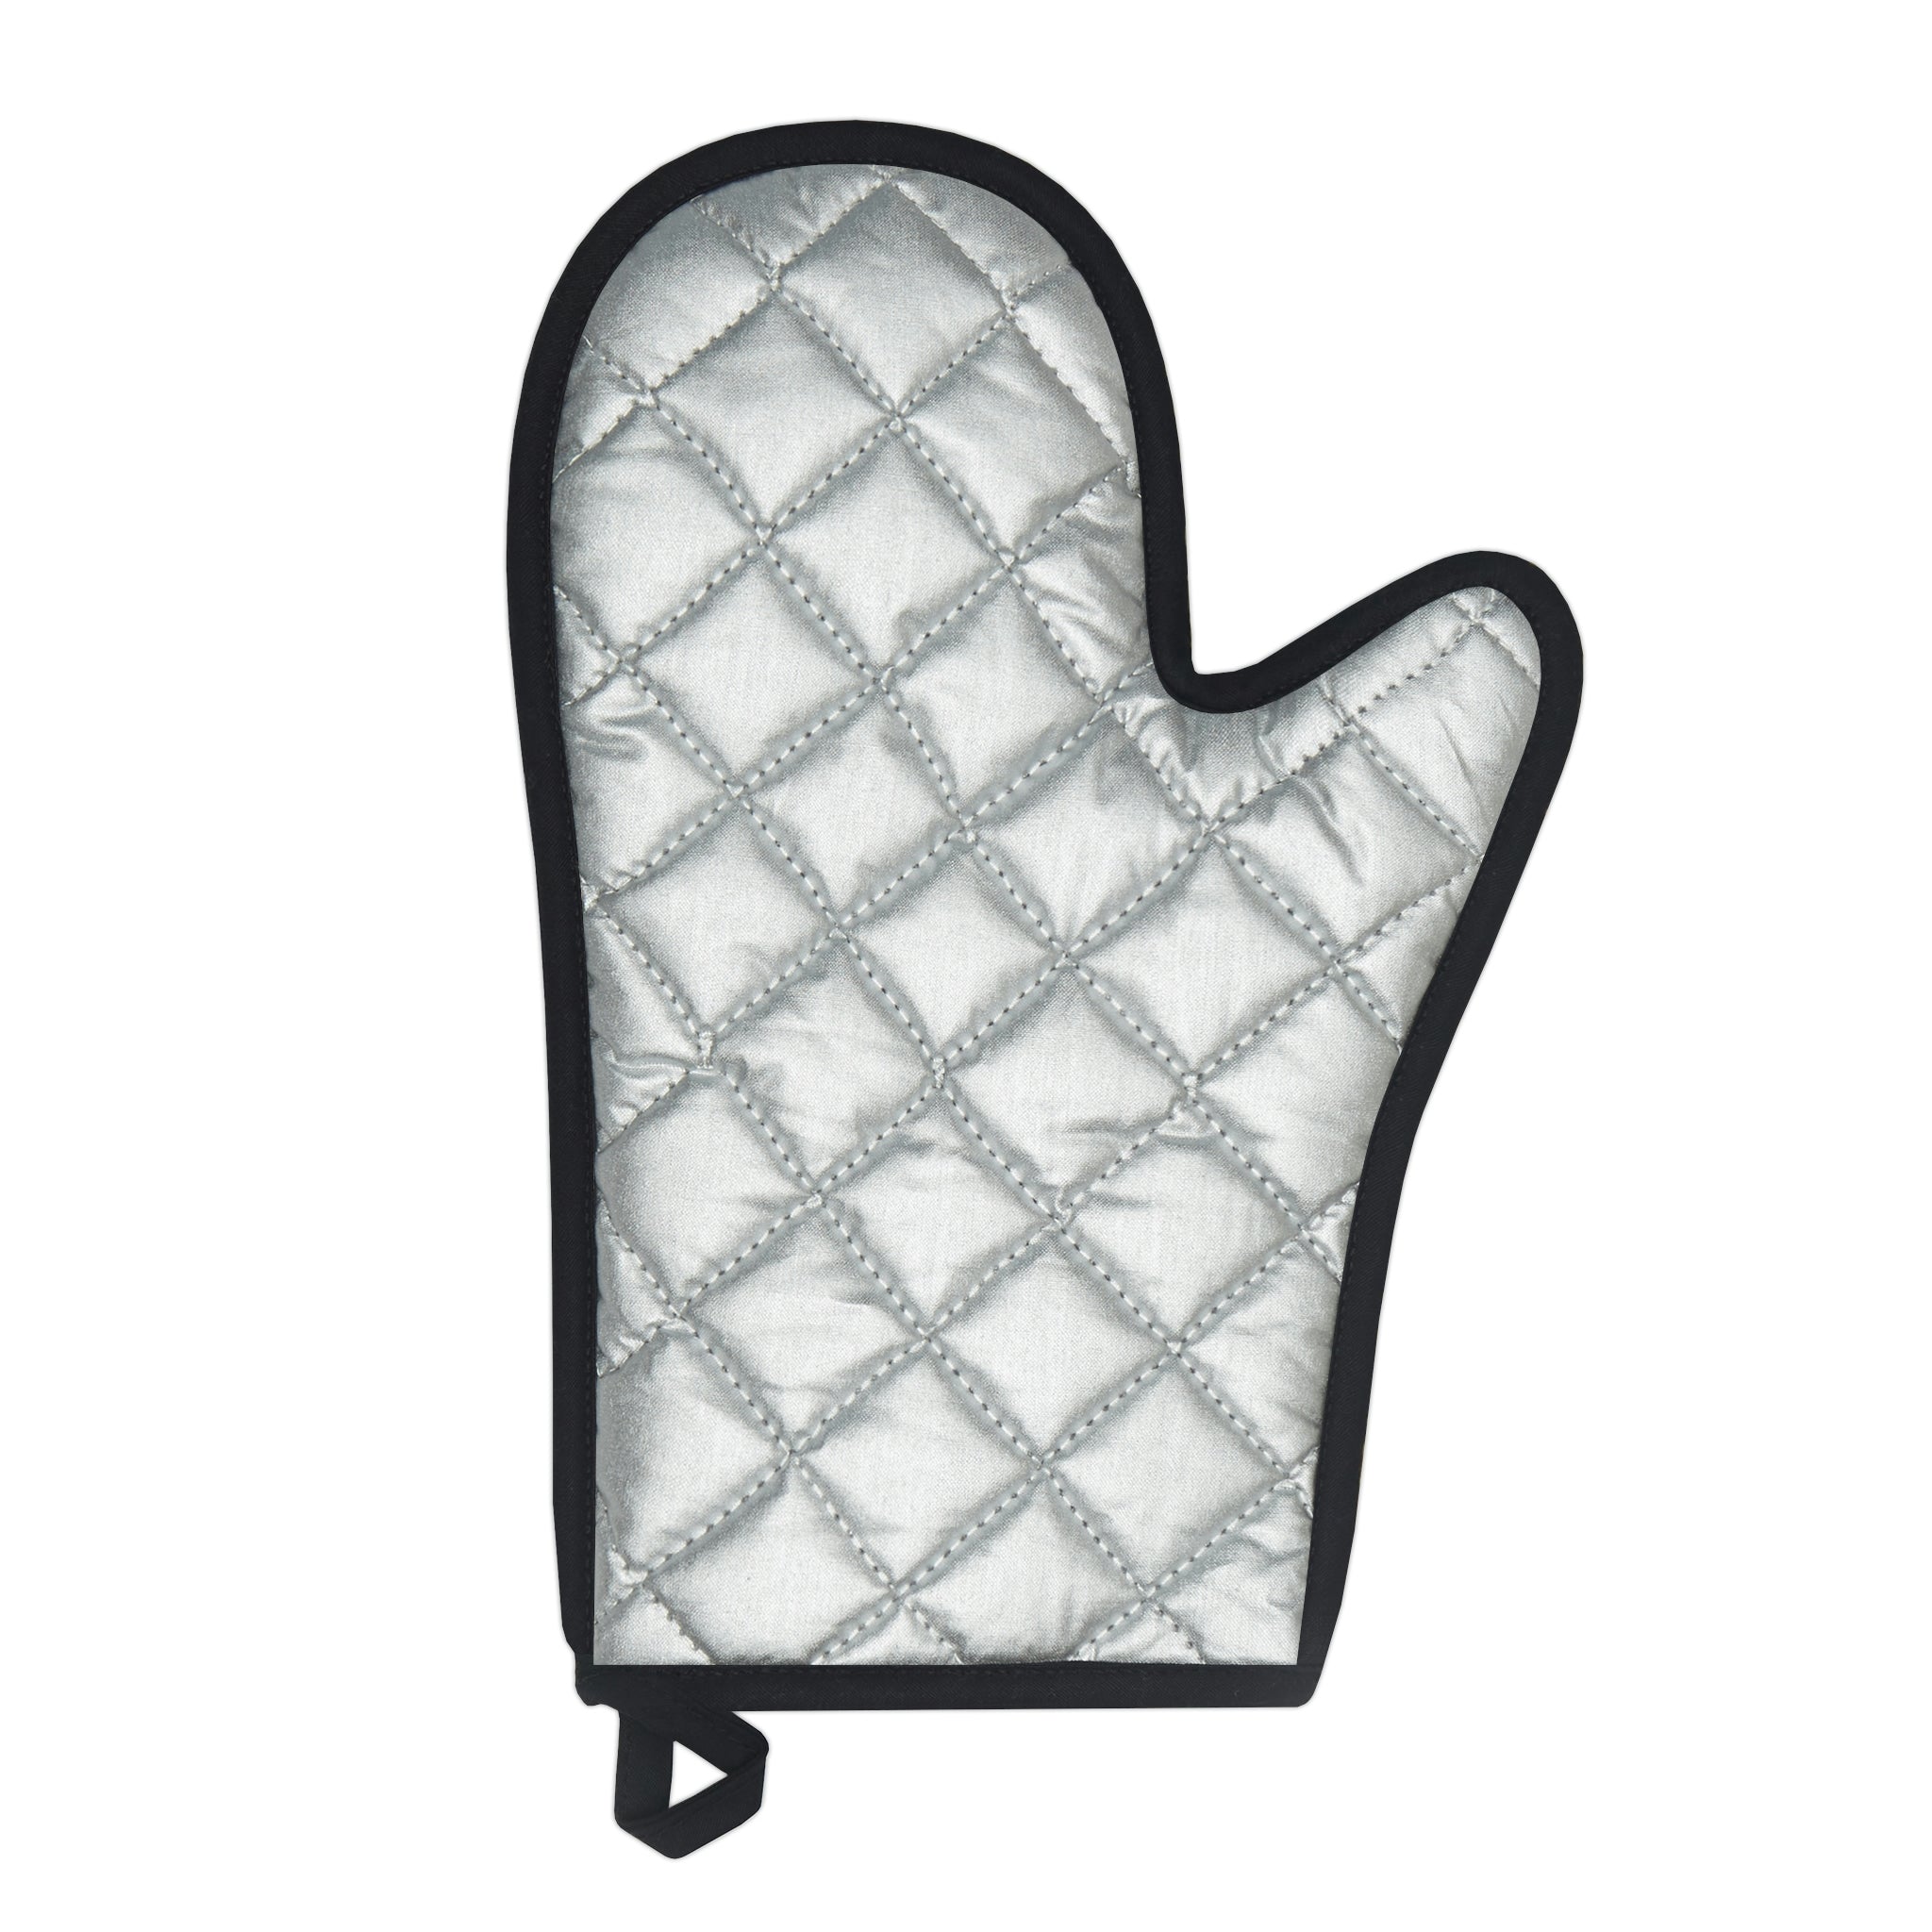 Oven mitts, potholders, happy place, oven gloves, heat insulation and protection, love cooking, cooking enthusiast, cotton trim - cooking#2